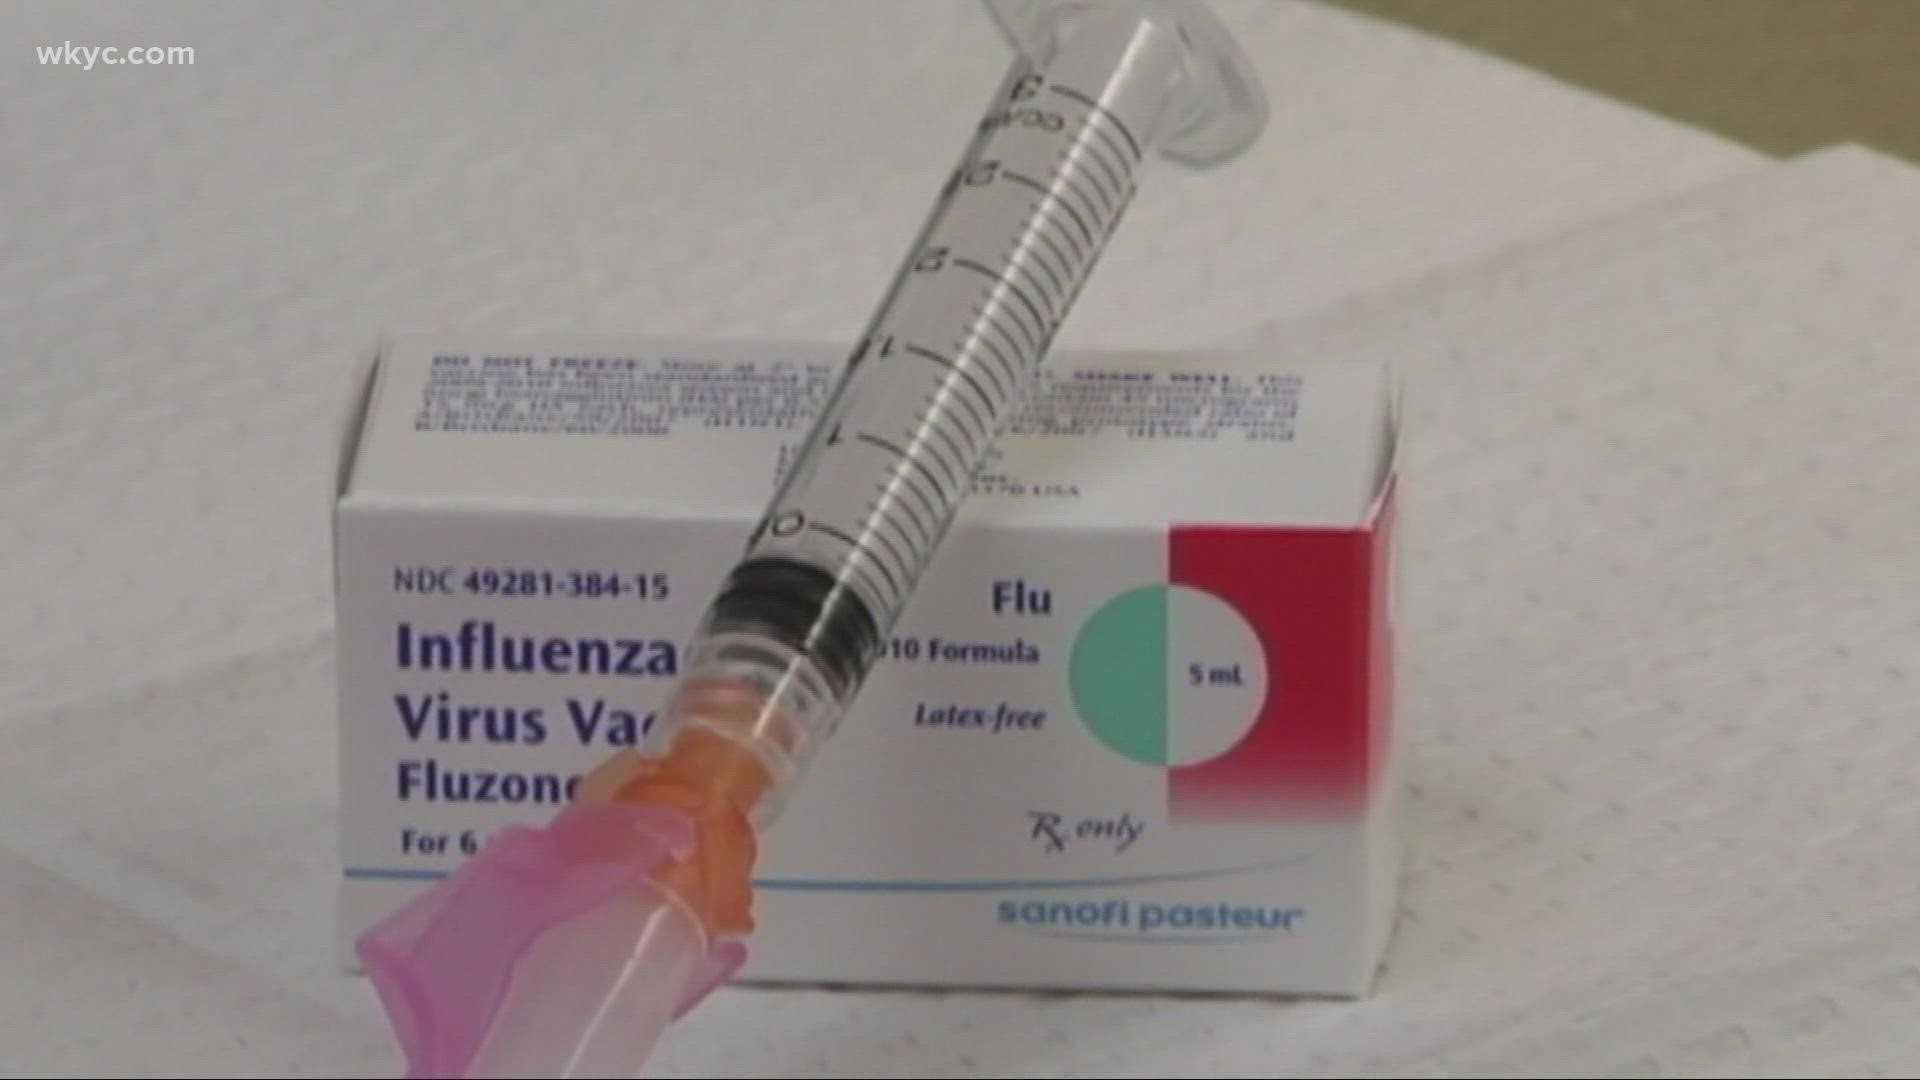 Health experts are finding flu and influenza cases are back on the rise. That includes right here in Northeast Ohio.